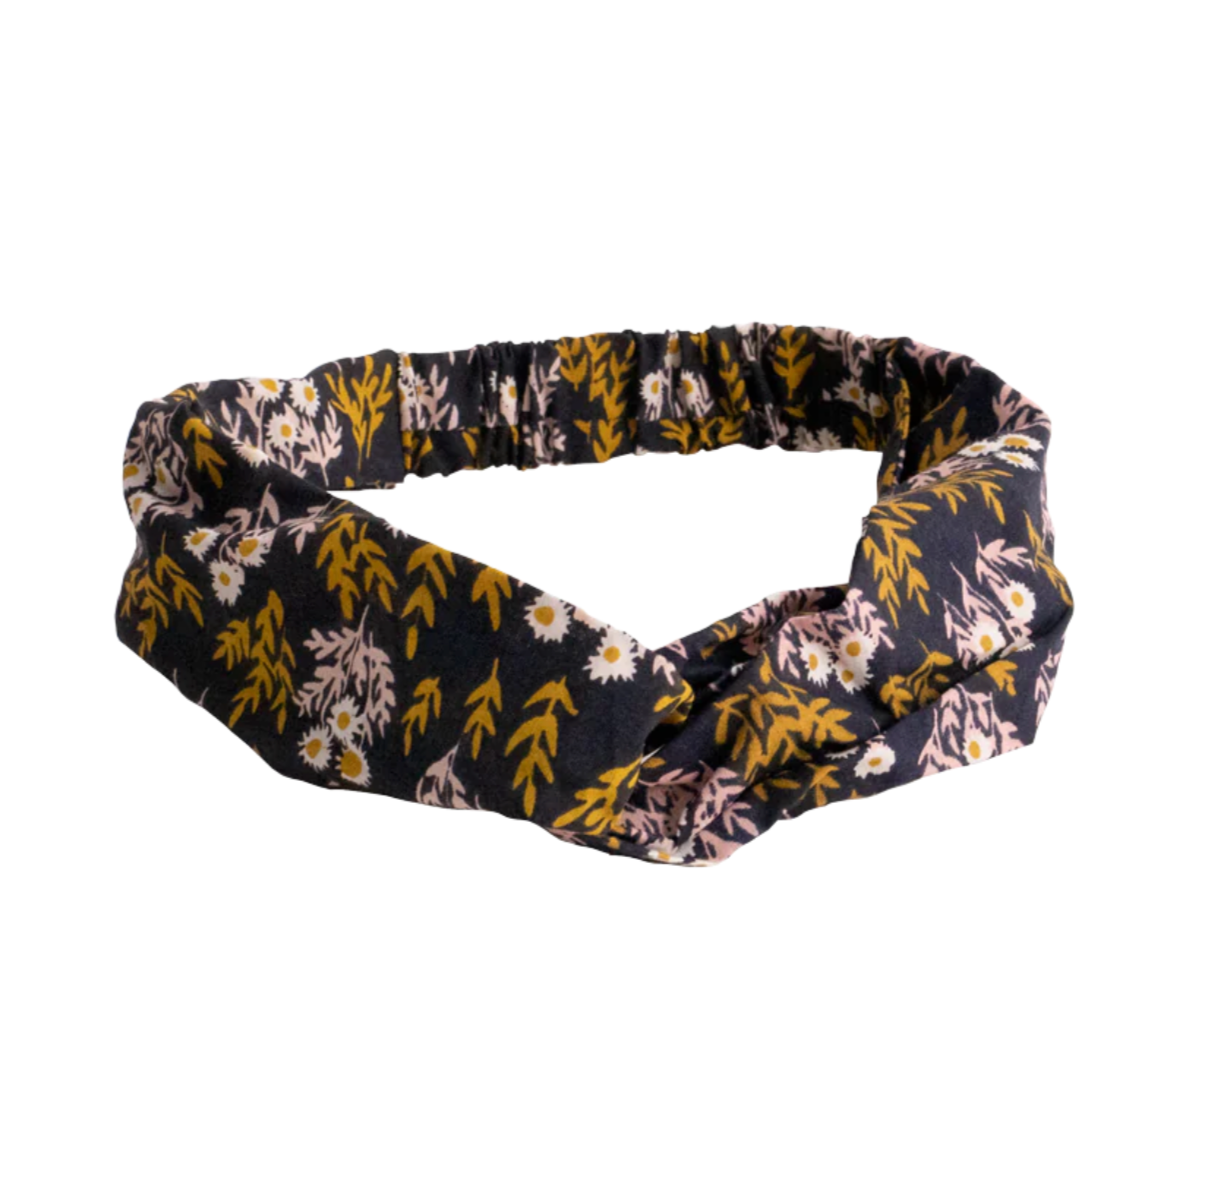 the Tilly headband features a navy blue background with a yellow + pink daisy pattern